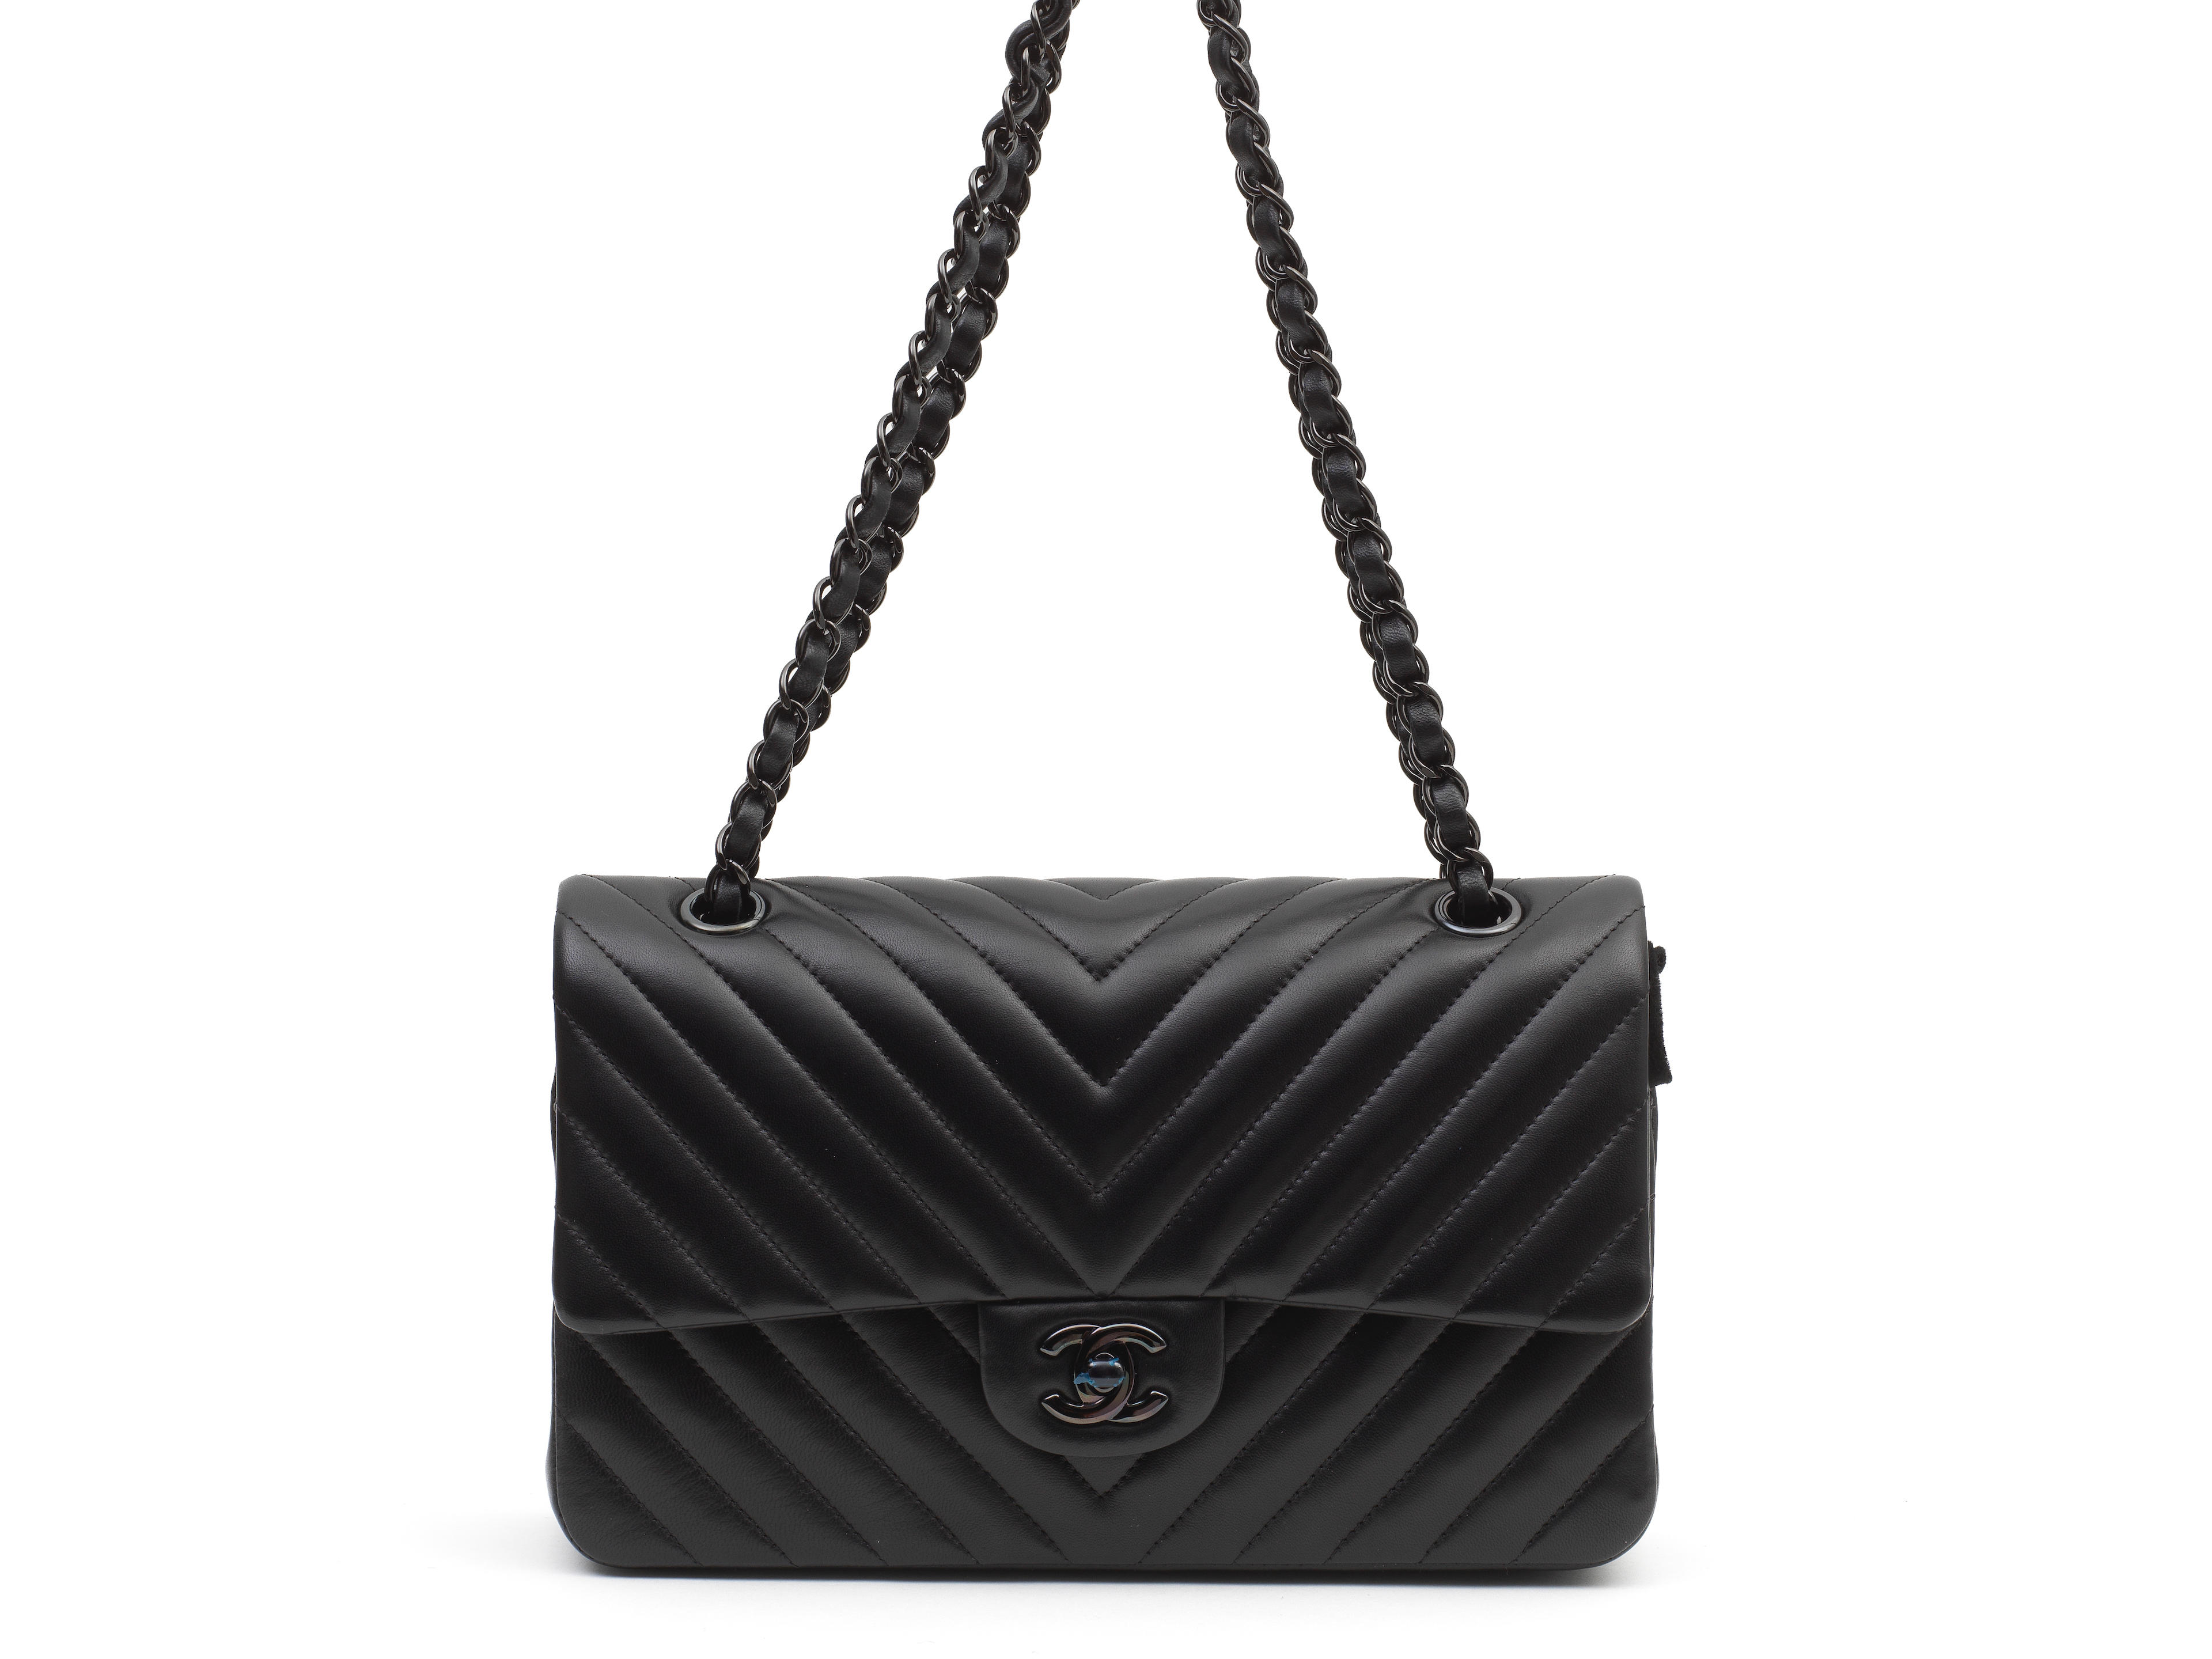 A SO BLACK CHEVRON QUILTED LAMBSKIN CLASSIC DOUBLE FLAP Chanel, Spring 2015 (includes serial sticker, authenticity card, felt protectors, dust bag and box)